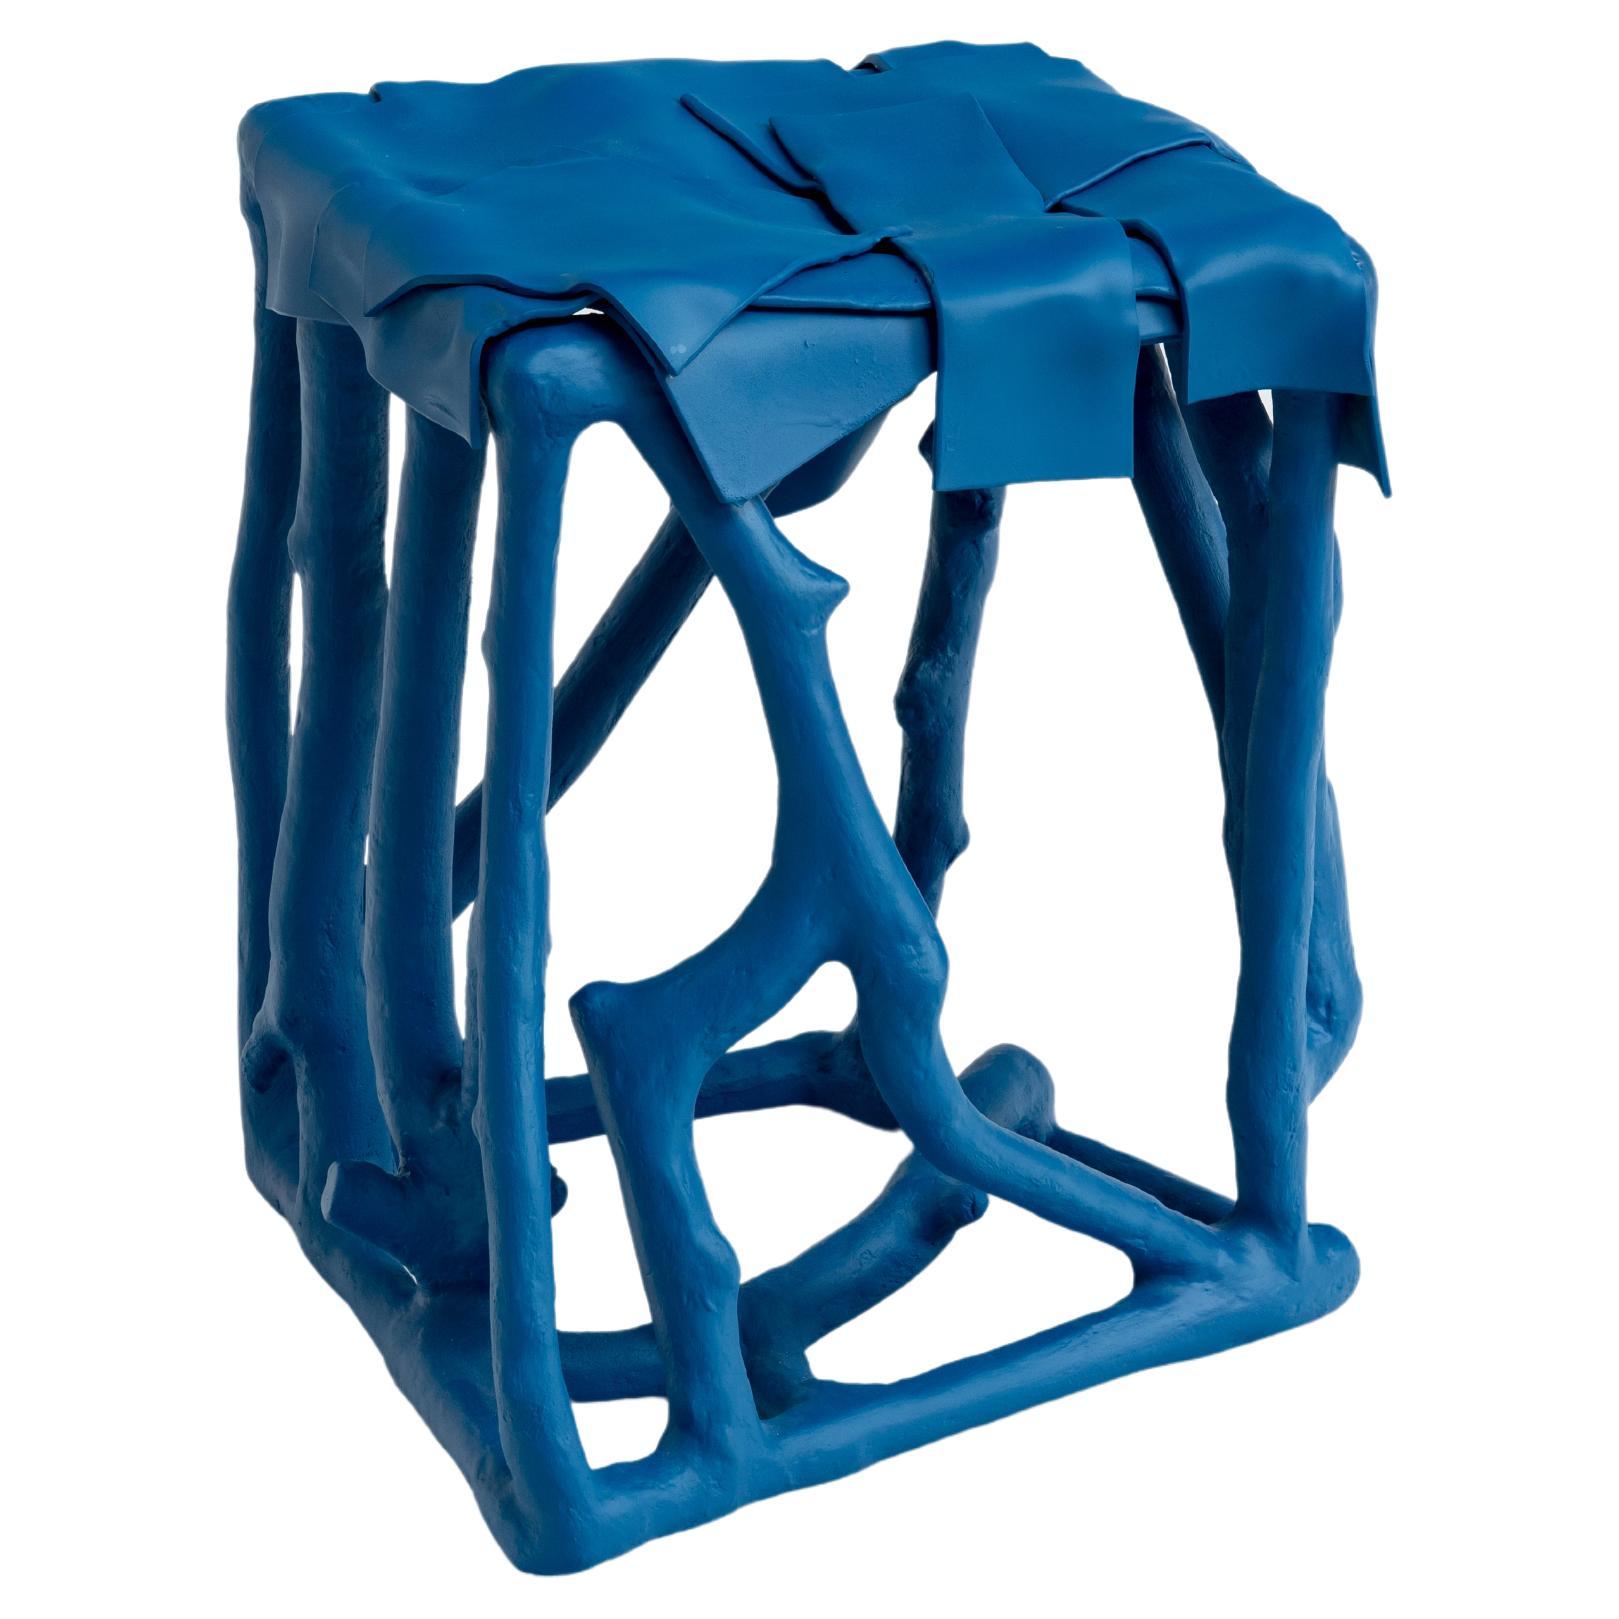 Sculptural Azure Blue Occasional Table or Stool by Louis Bressolles